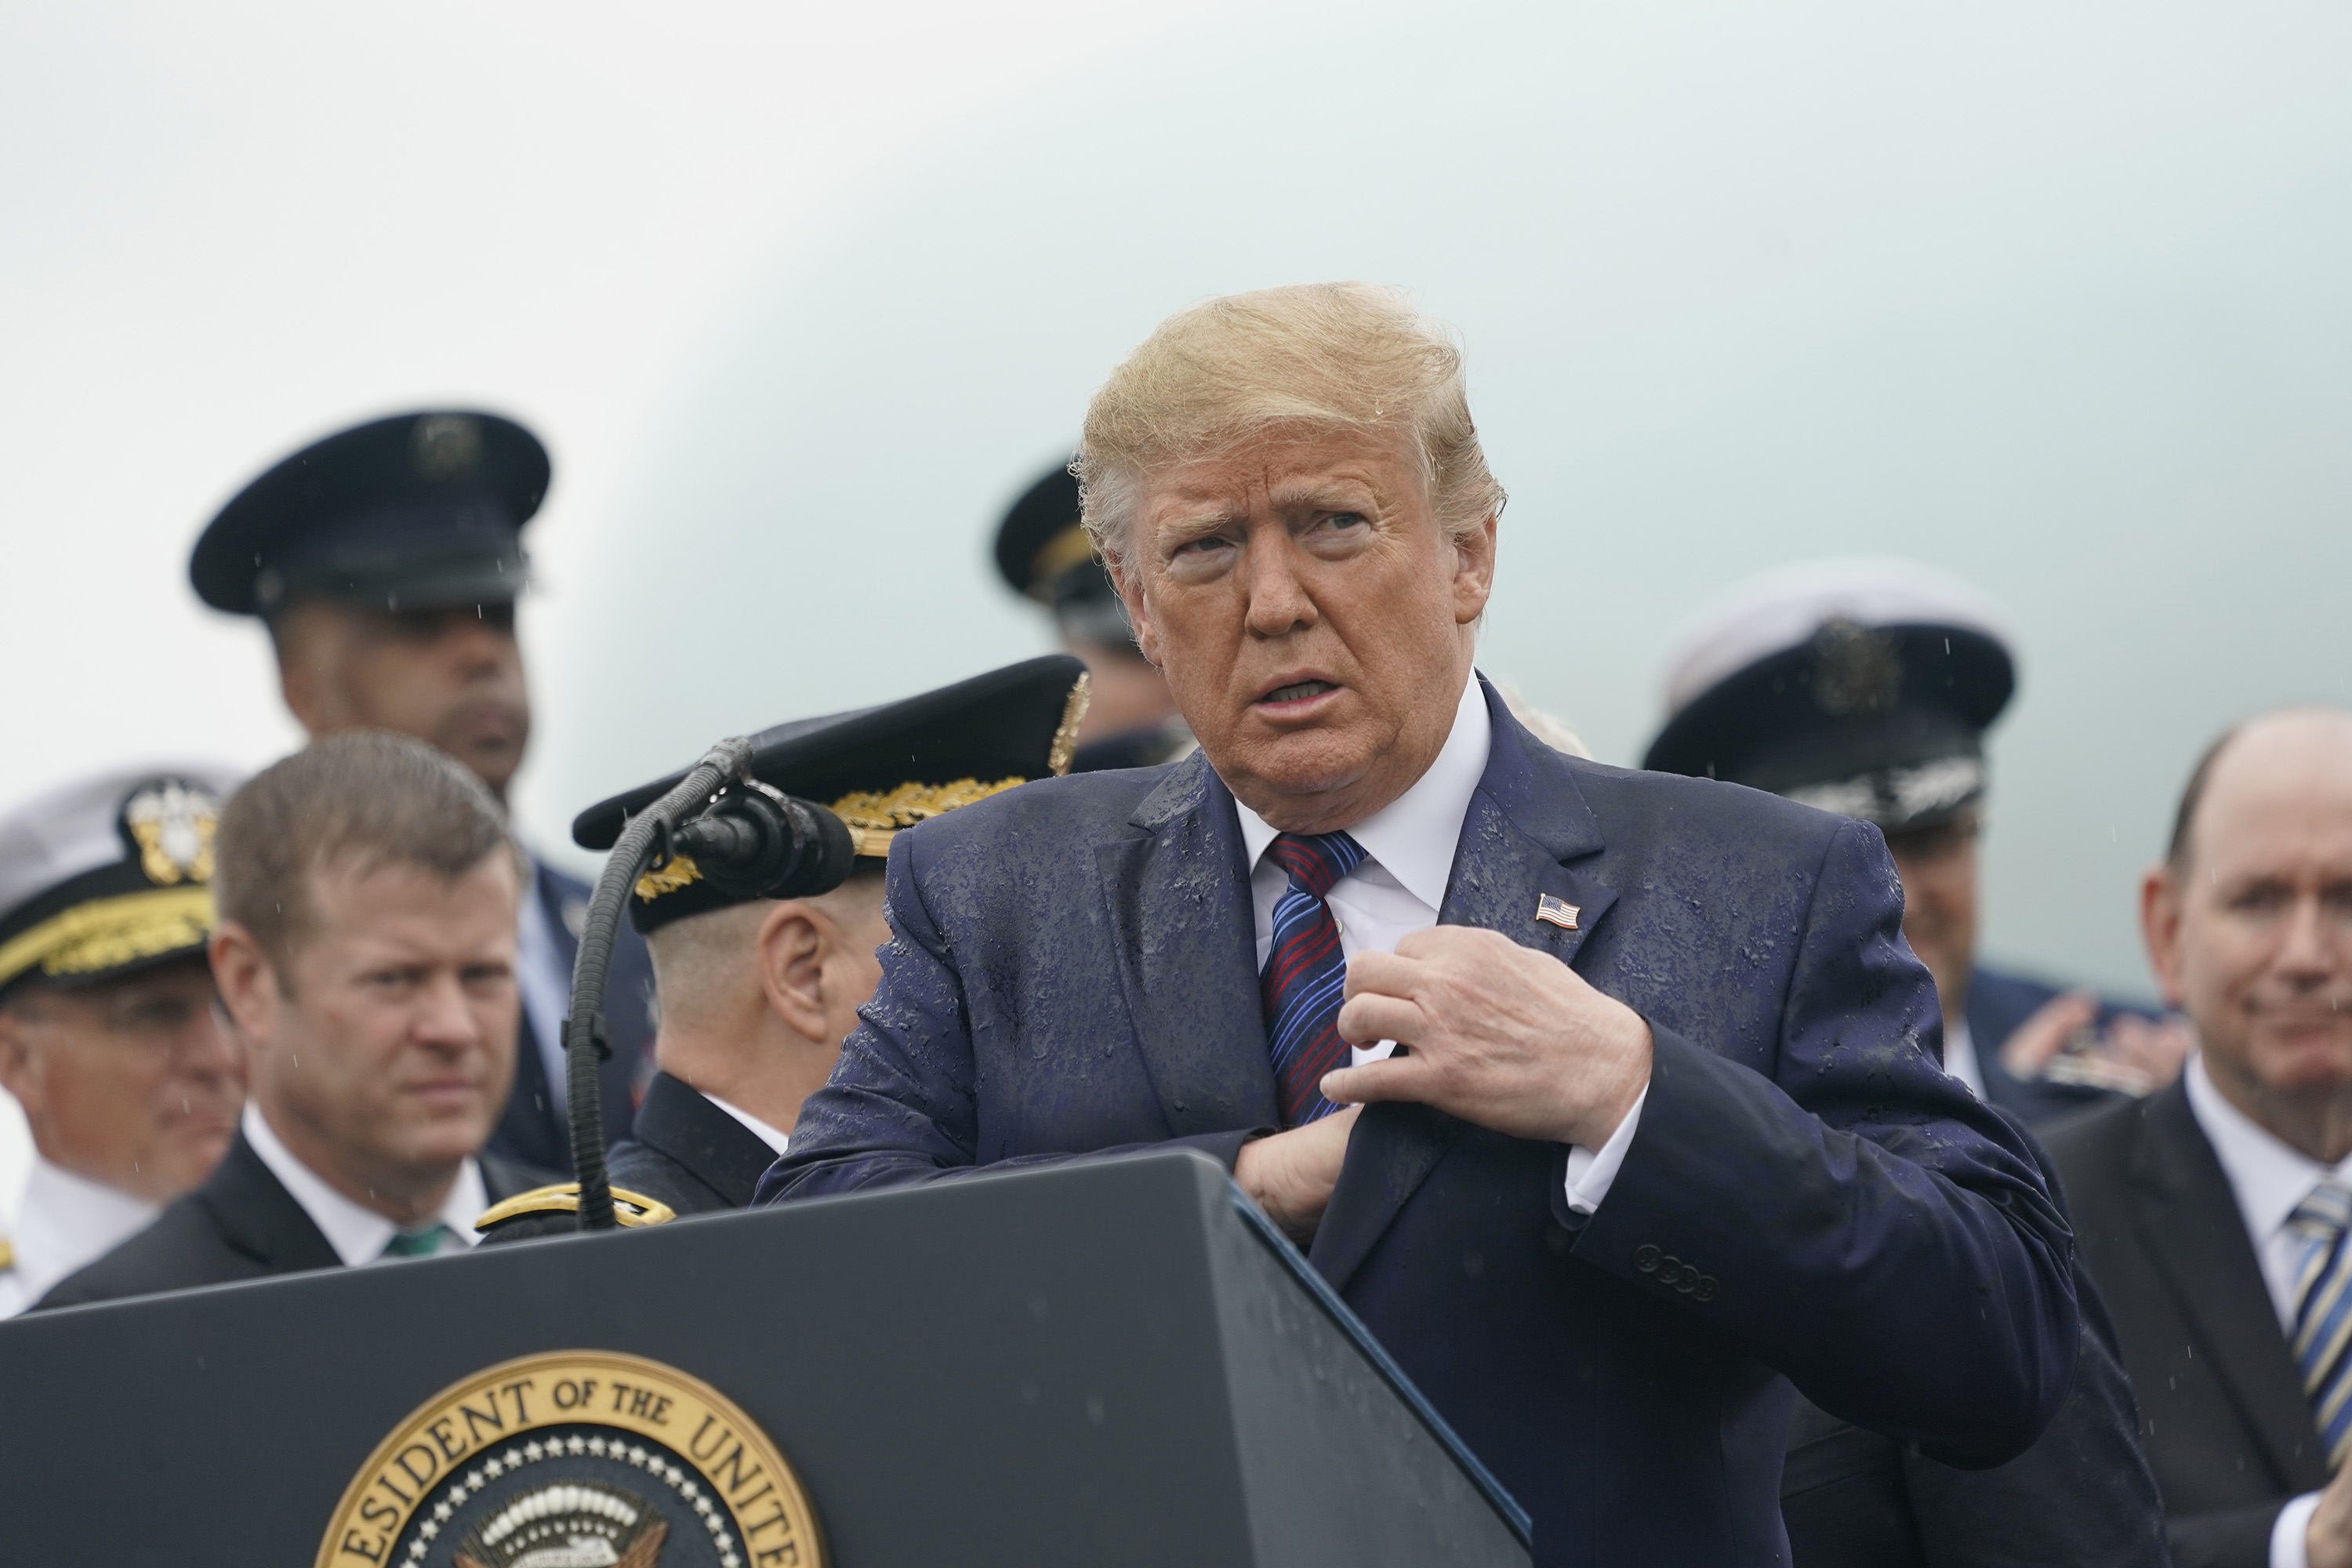 U.S. President Donald Trump prepares to speak during a welcoming ceremony for joint chiefs of staff Chairman Mark Milley at Fort Myer in Arlington, Virginia, U.S., on Monday, Sept. 30, 2019. 